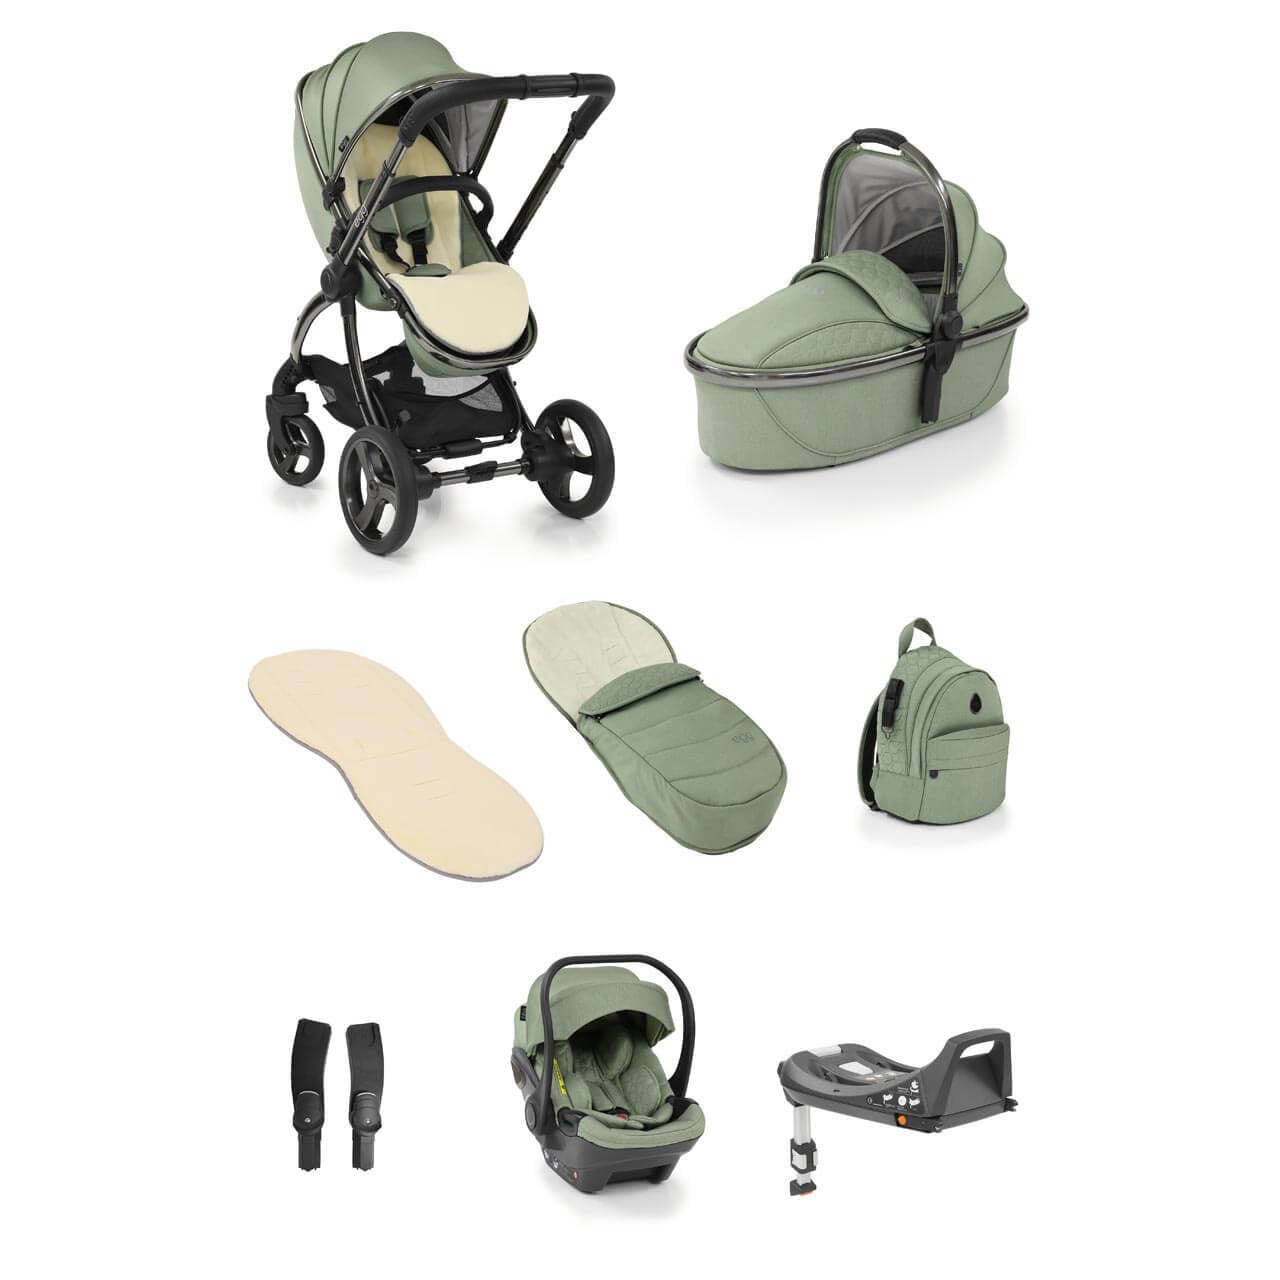 Egg® 2 Luxury Bundle with Egg® i-Size Car Seat Travel System - Seagrass